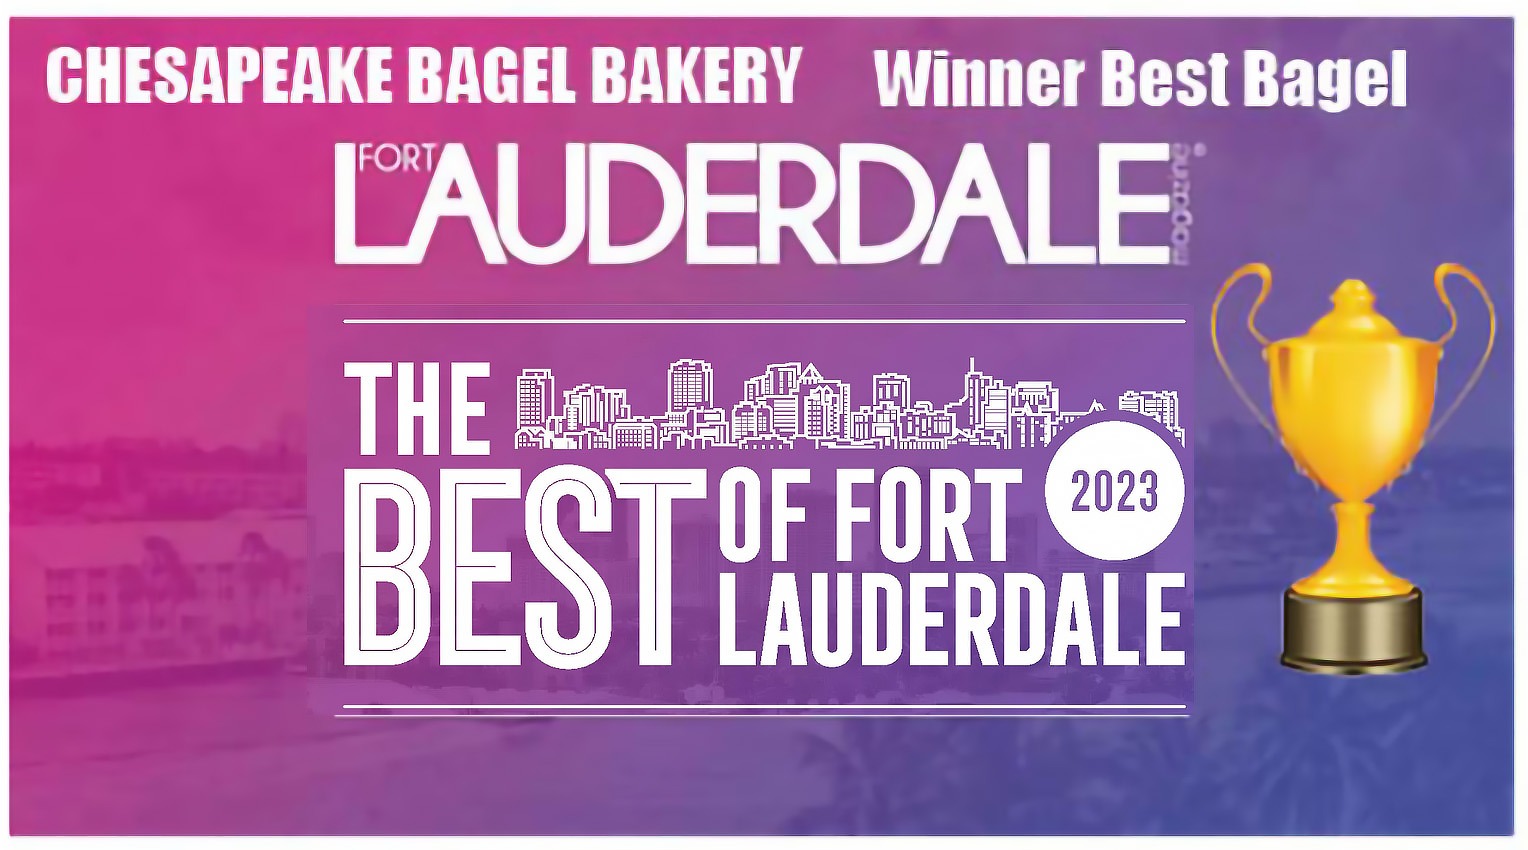 best of ft lauderdale 2023 done